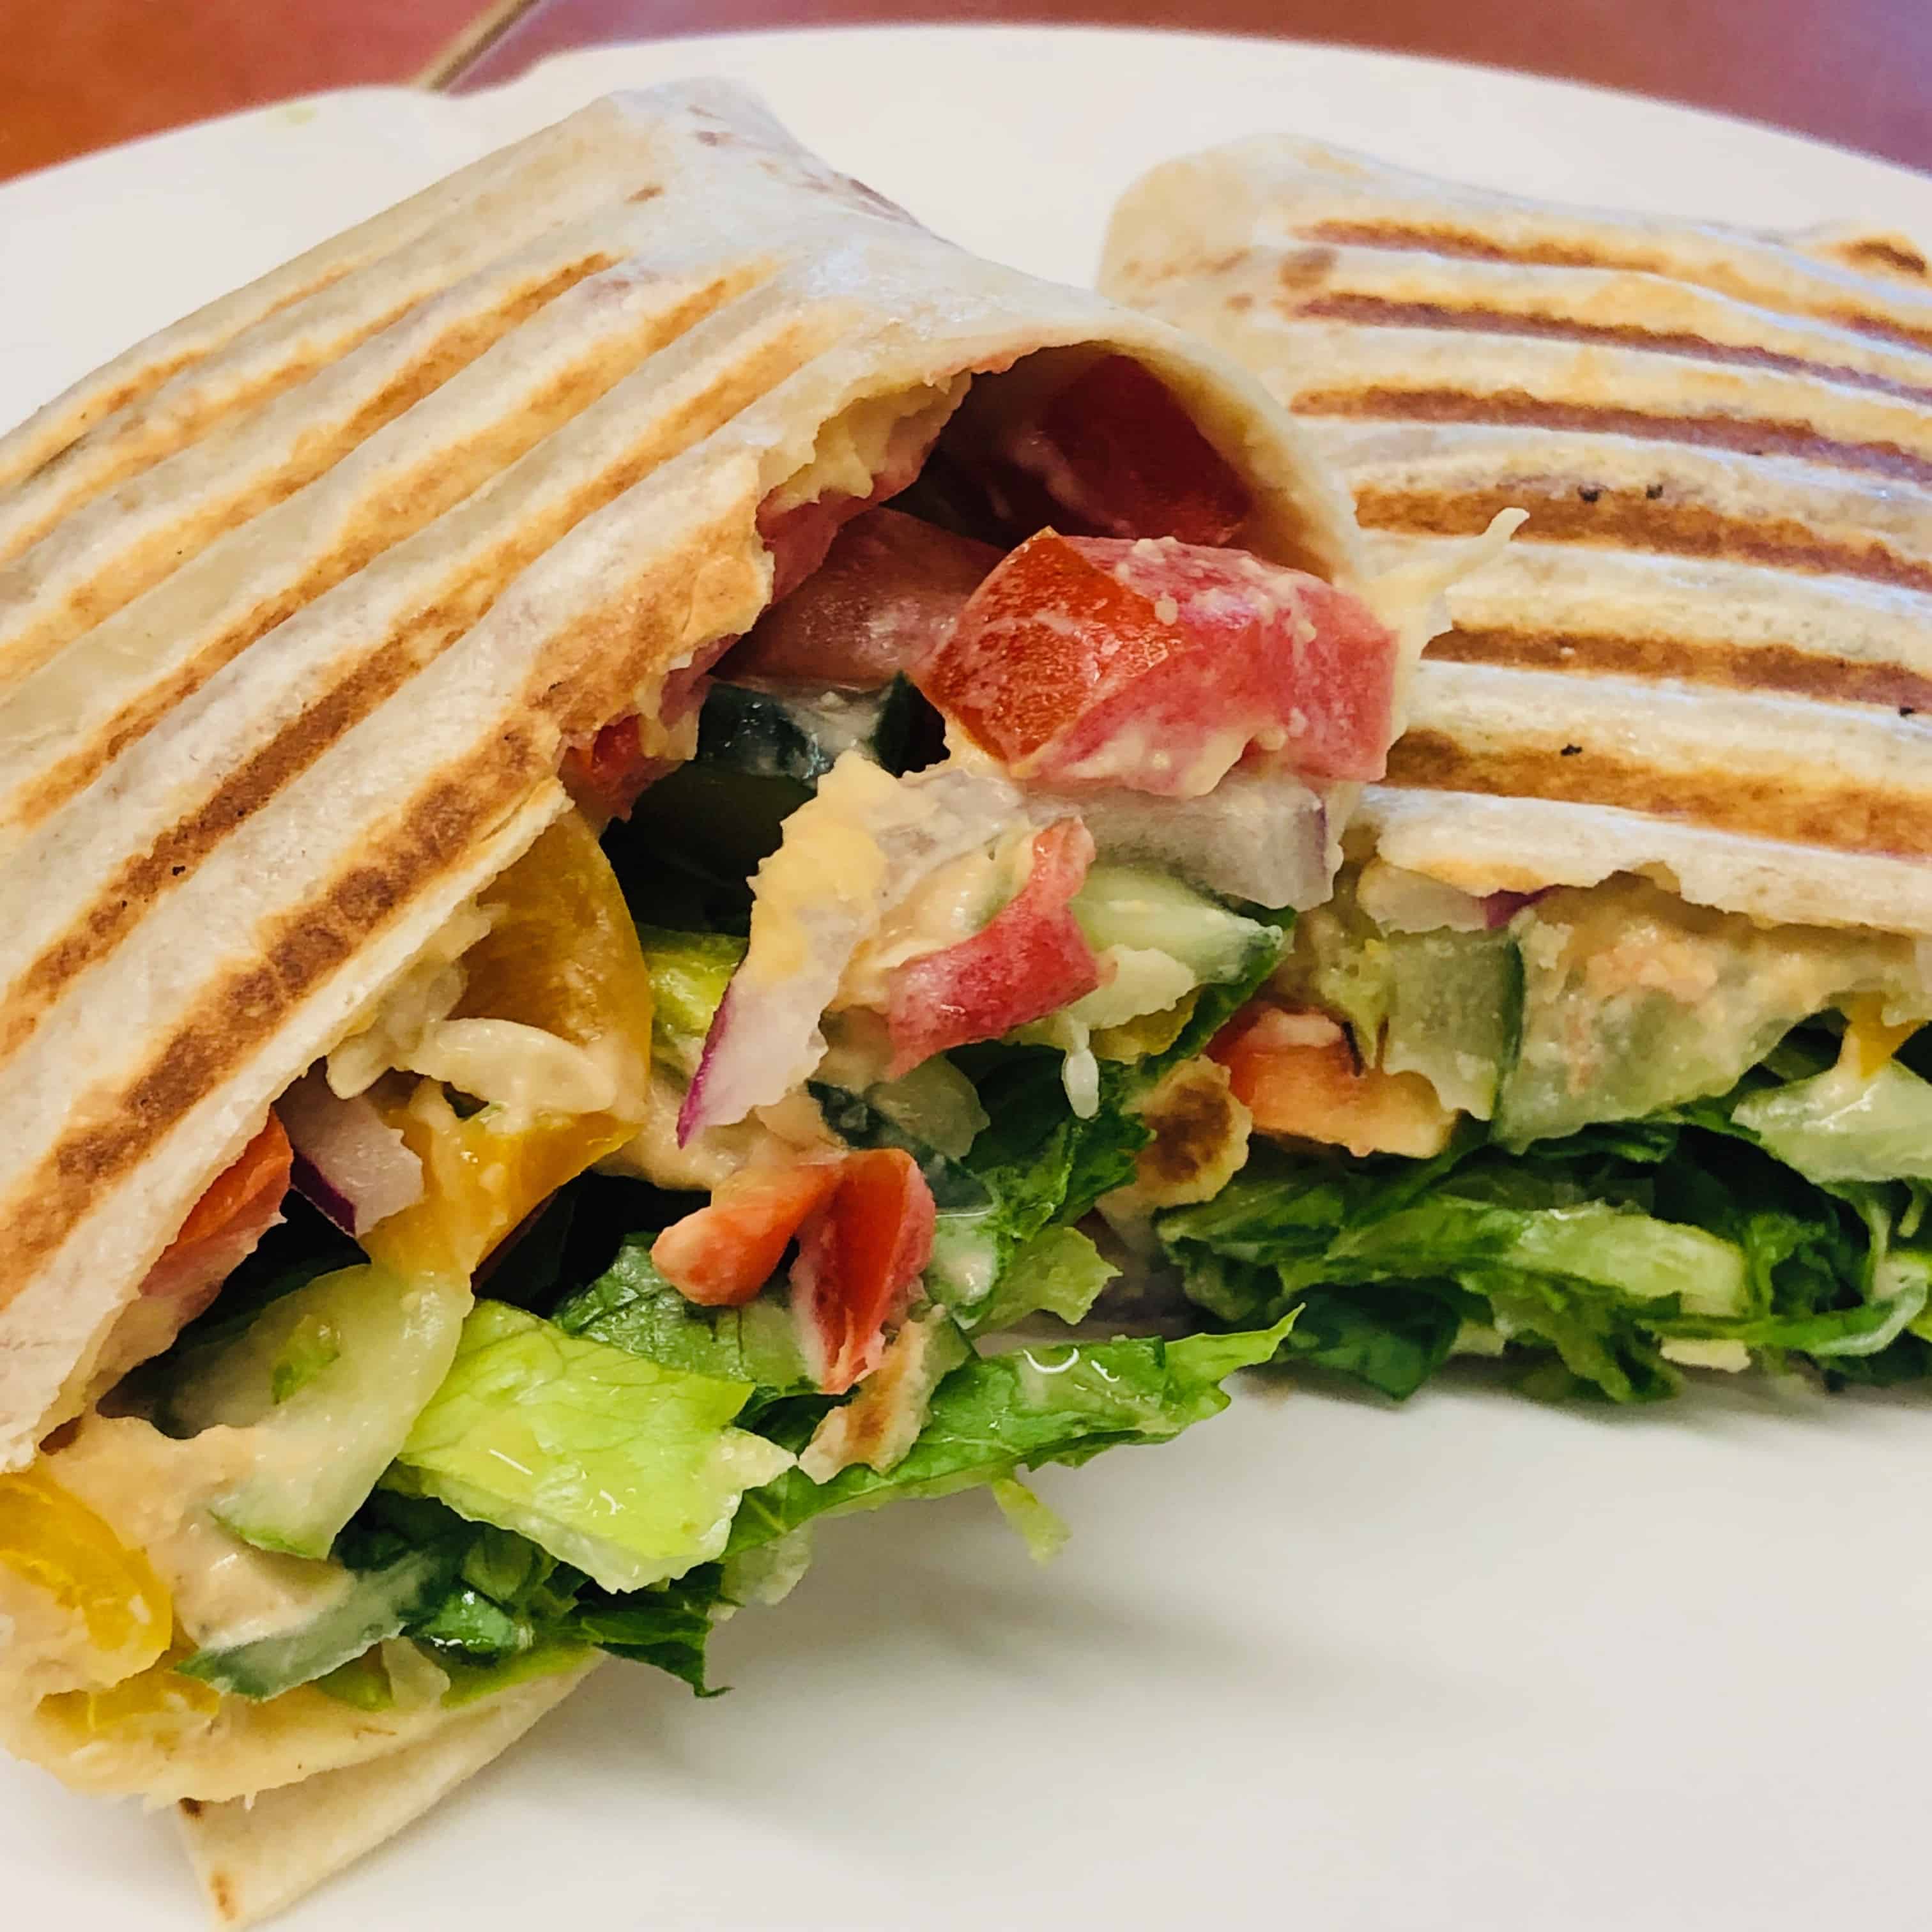 The Hummus Wrap is a very popular out-of-the-gate vegan lunch option, packed with flavor and protein